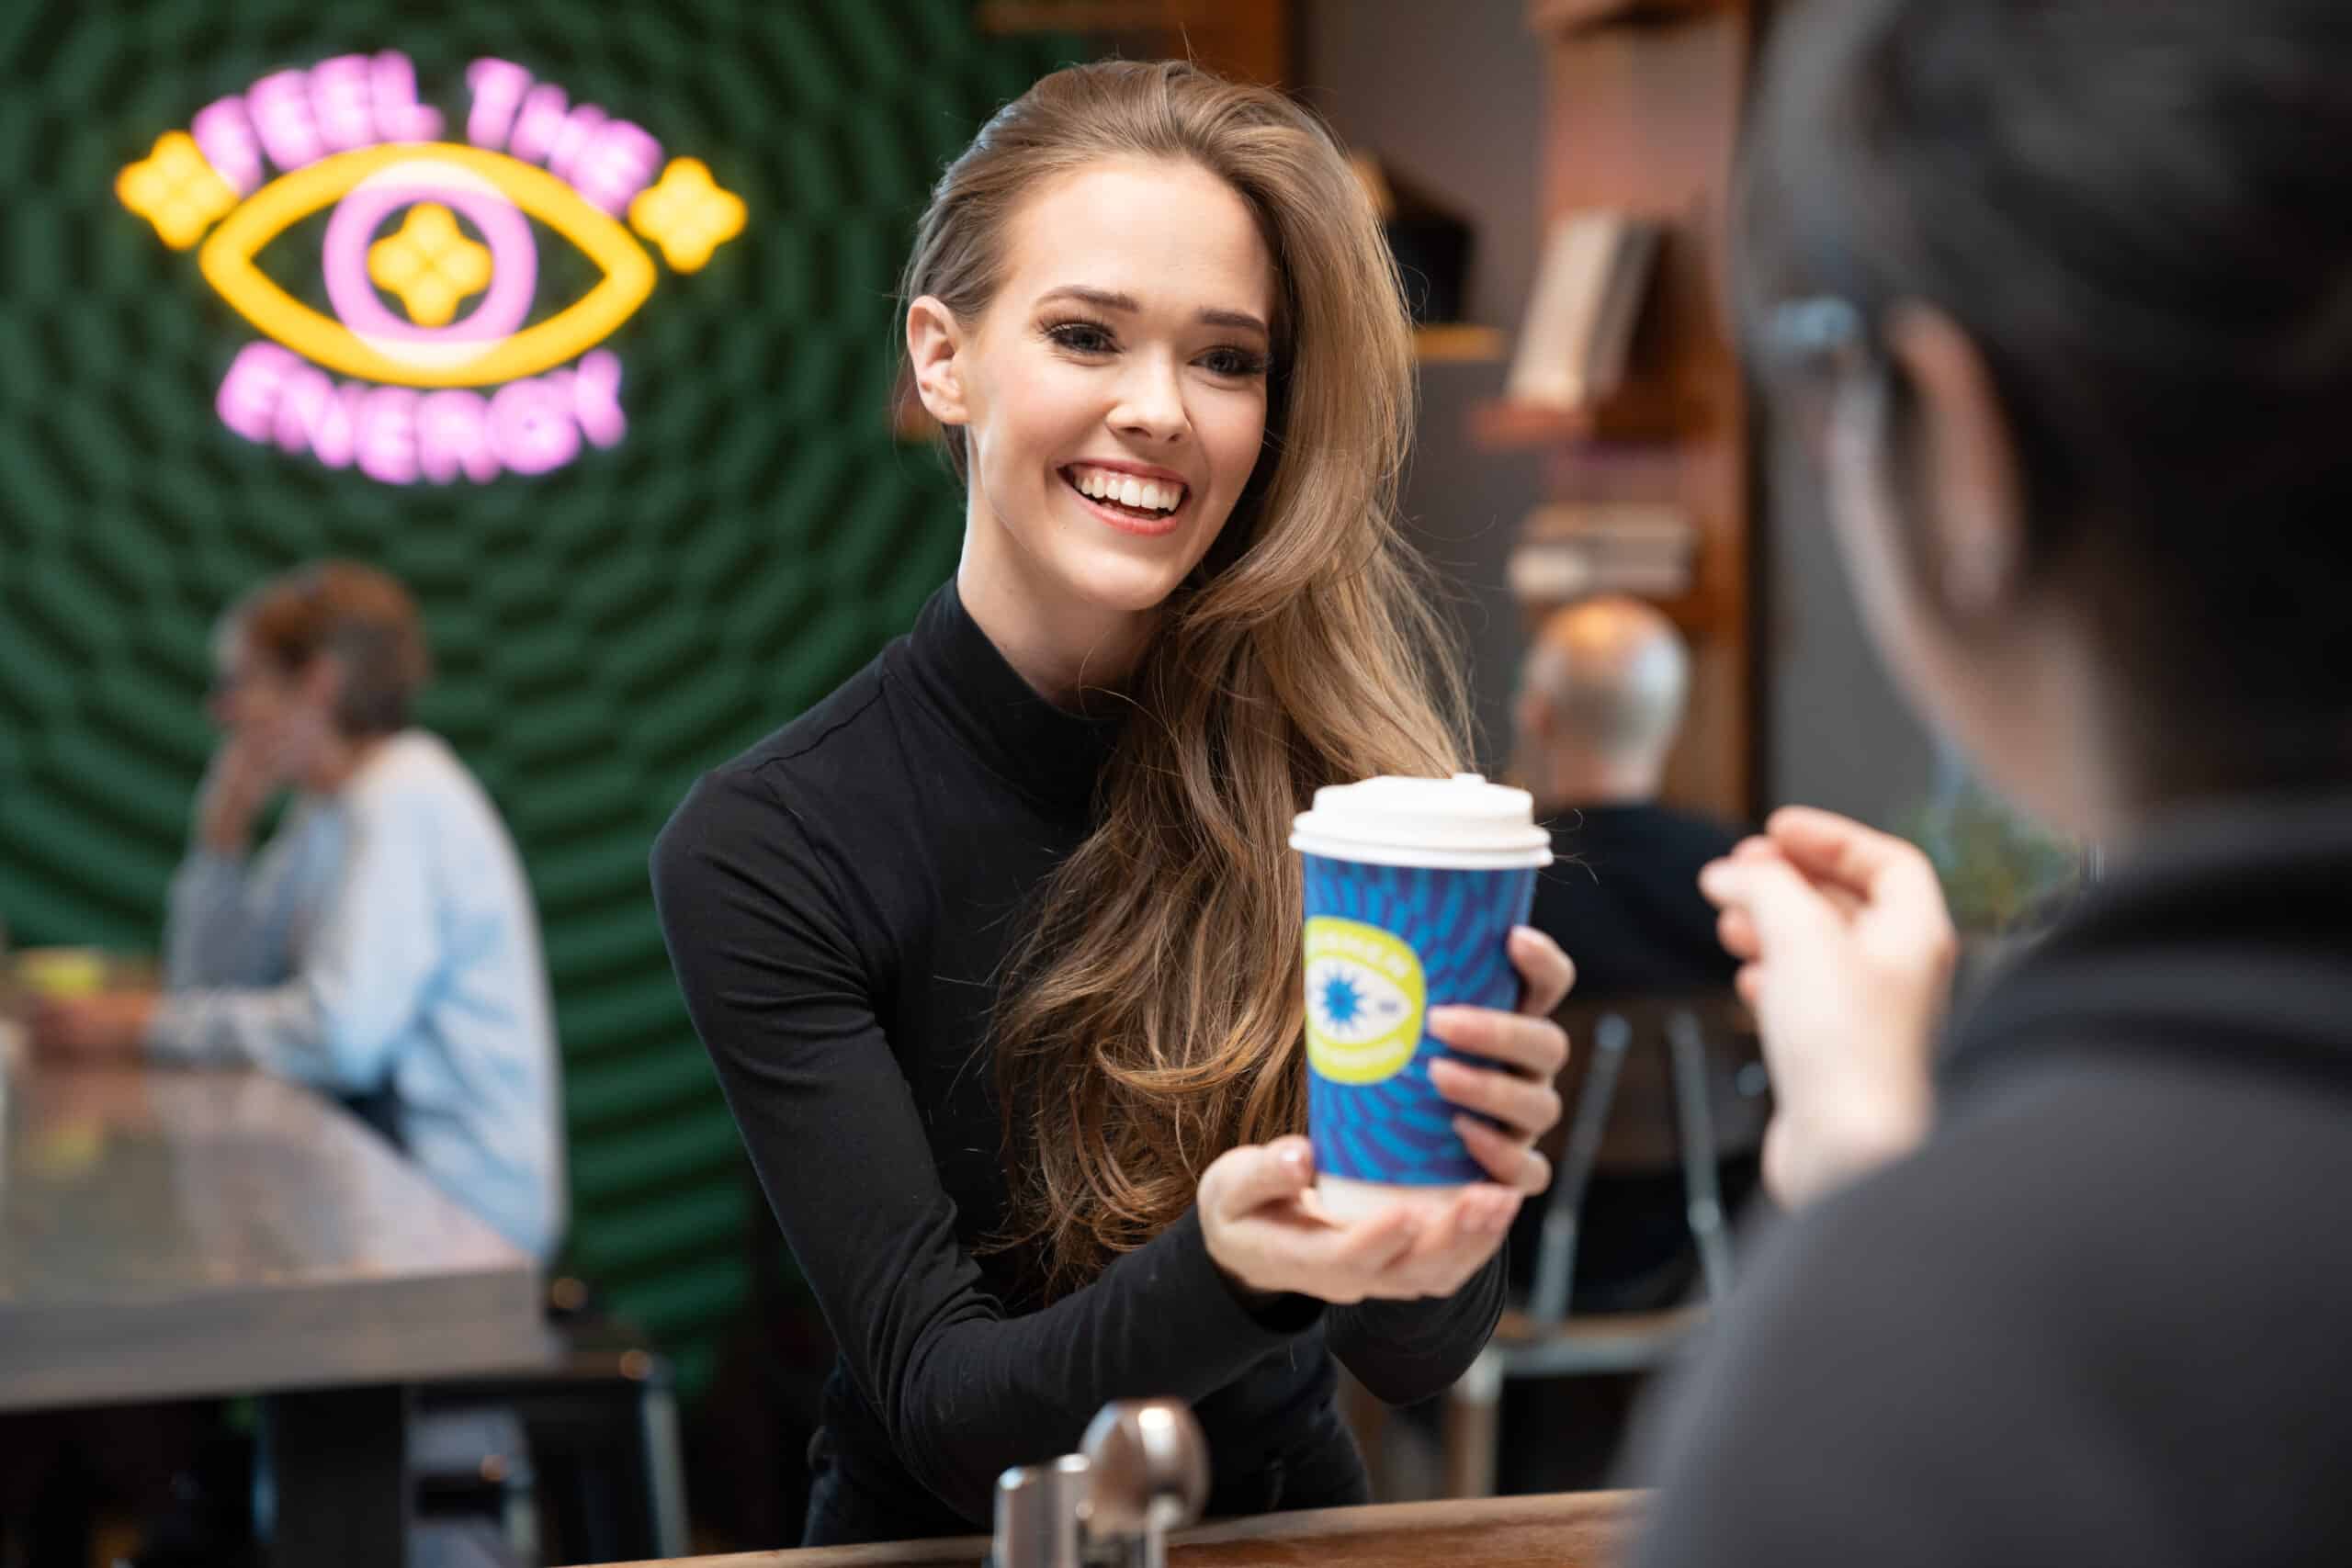 Two models exchanging a cup of coffee at a local coffee shop for Local Advertising and Local Marketing.